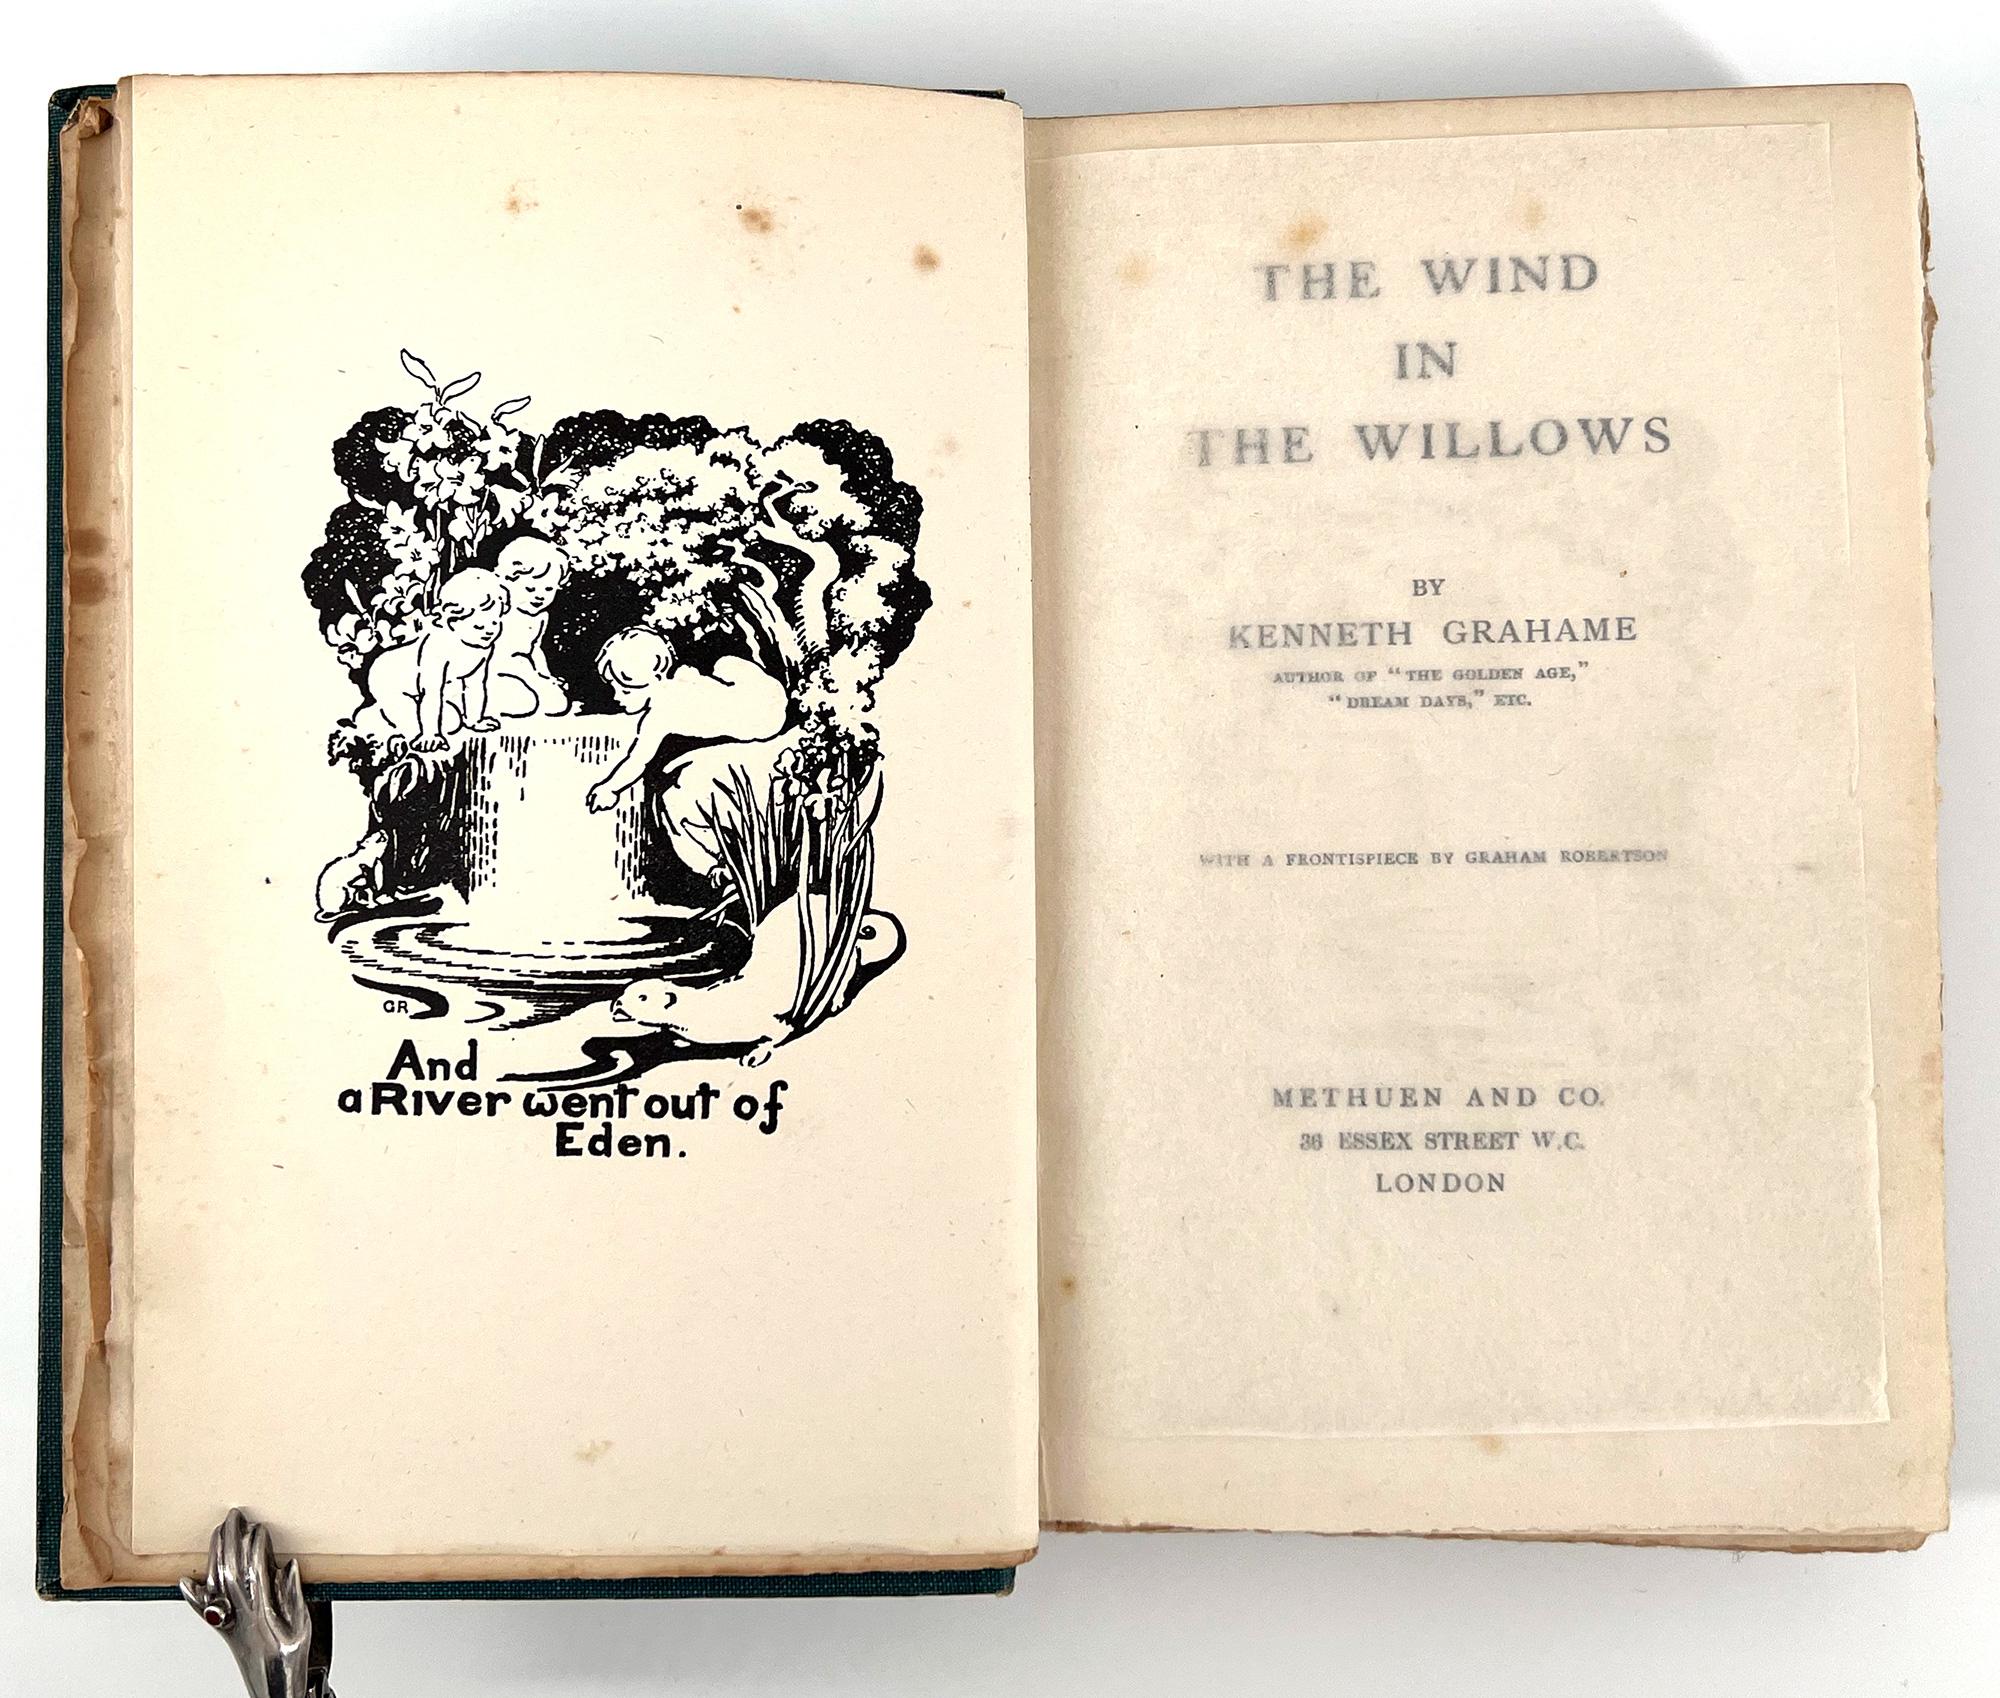 when was the wind in the willows first published